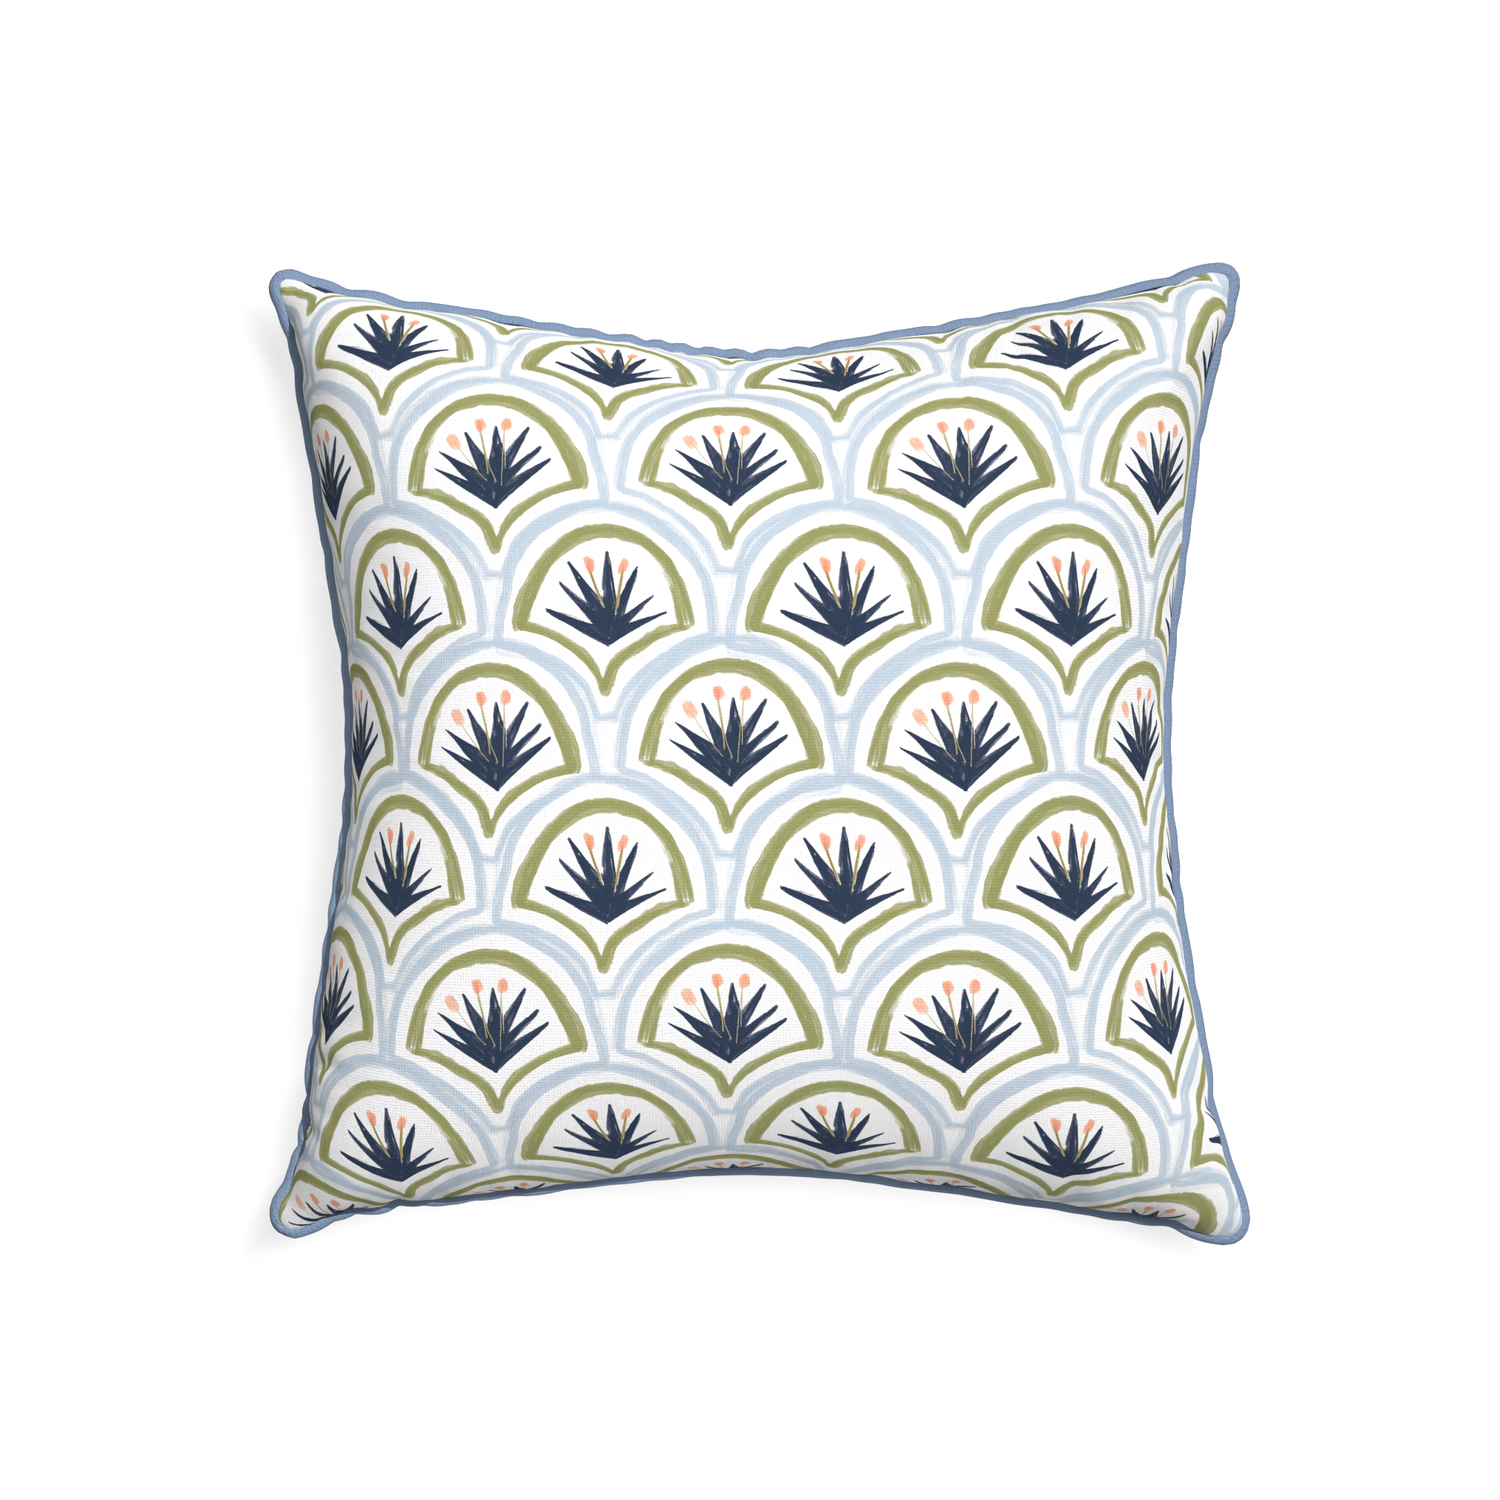 22-square thatcher midnight custom art deco palm patternpillow with sky piping on white background